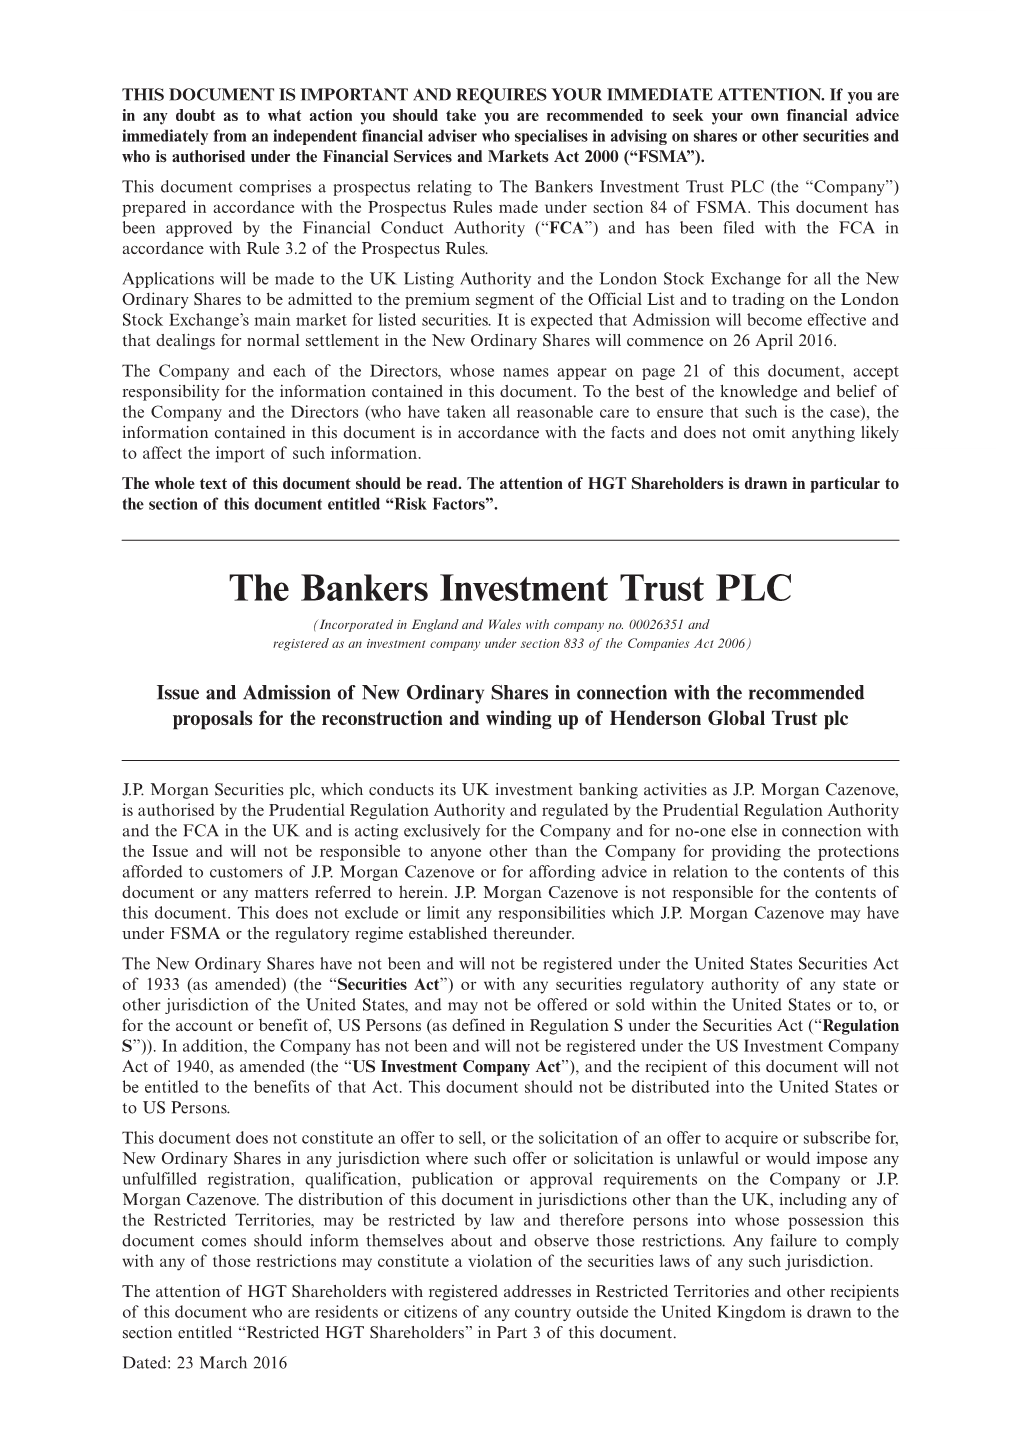 The Bankers Investment Trust PLC (The “Company”) Prepared in Accordance with the Prospectus Rules Made Under Section 84 of FSMA